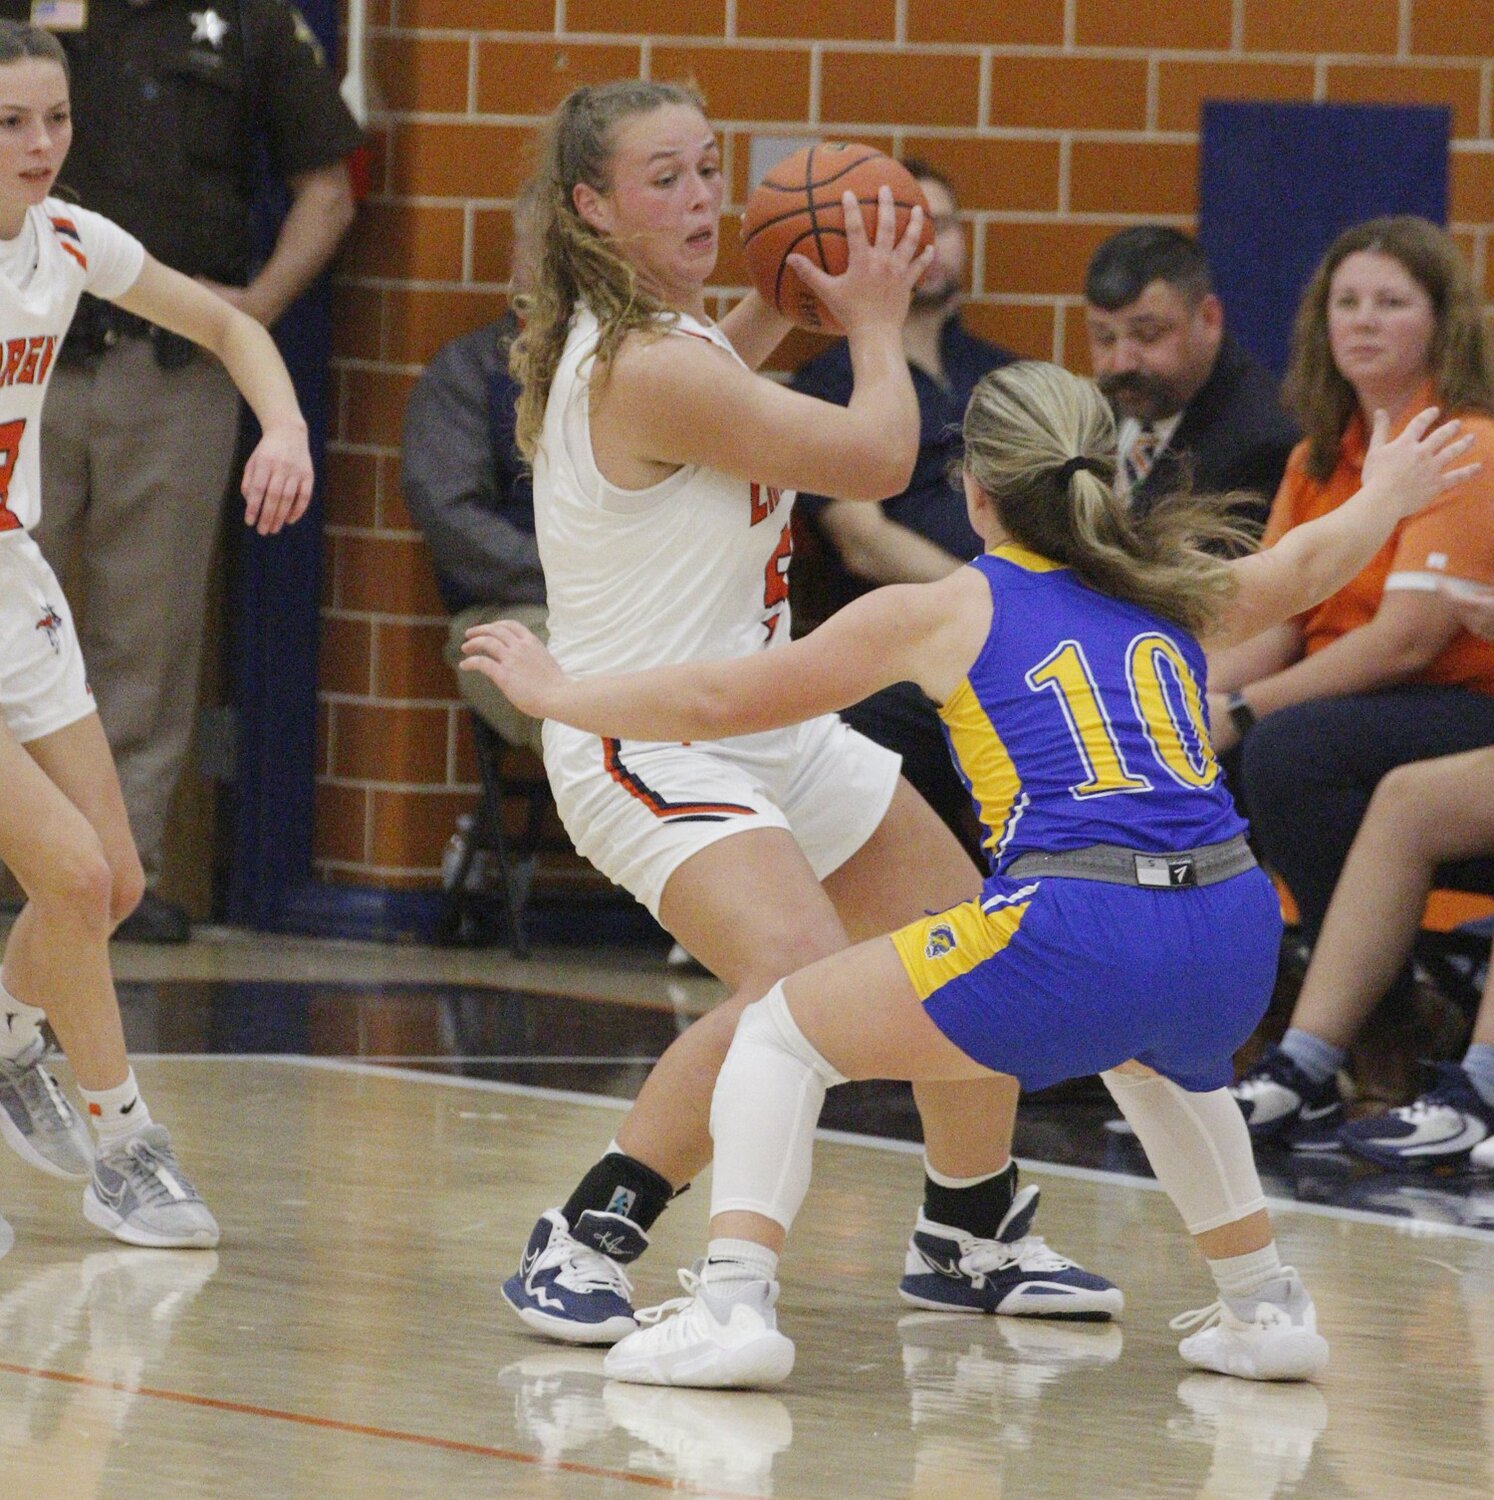 Junior Piper Ramey scored 14 points to lead the North Montgomery Chargers past county rival Crawfordsville 32-29 on Thursday night. North will now face another county rival in Southmont in the championship game of the 17th annual Girs Sugar Creek Classic